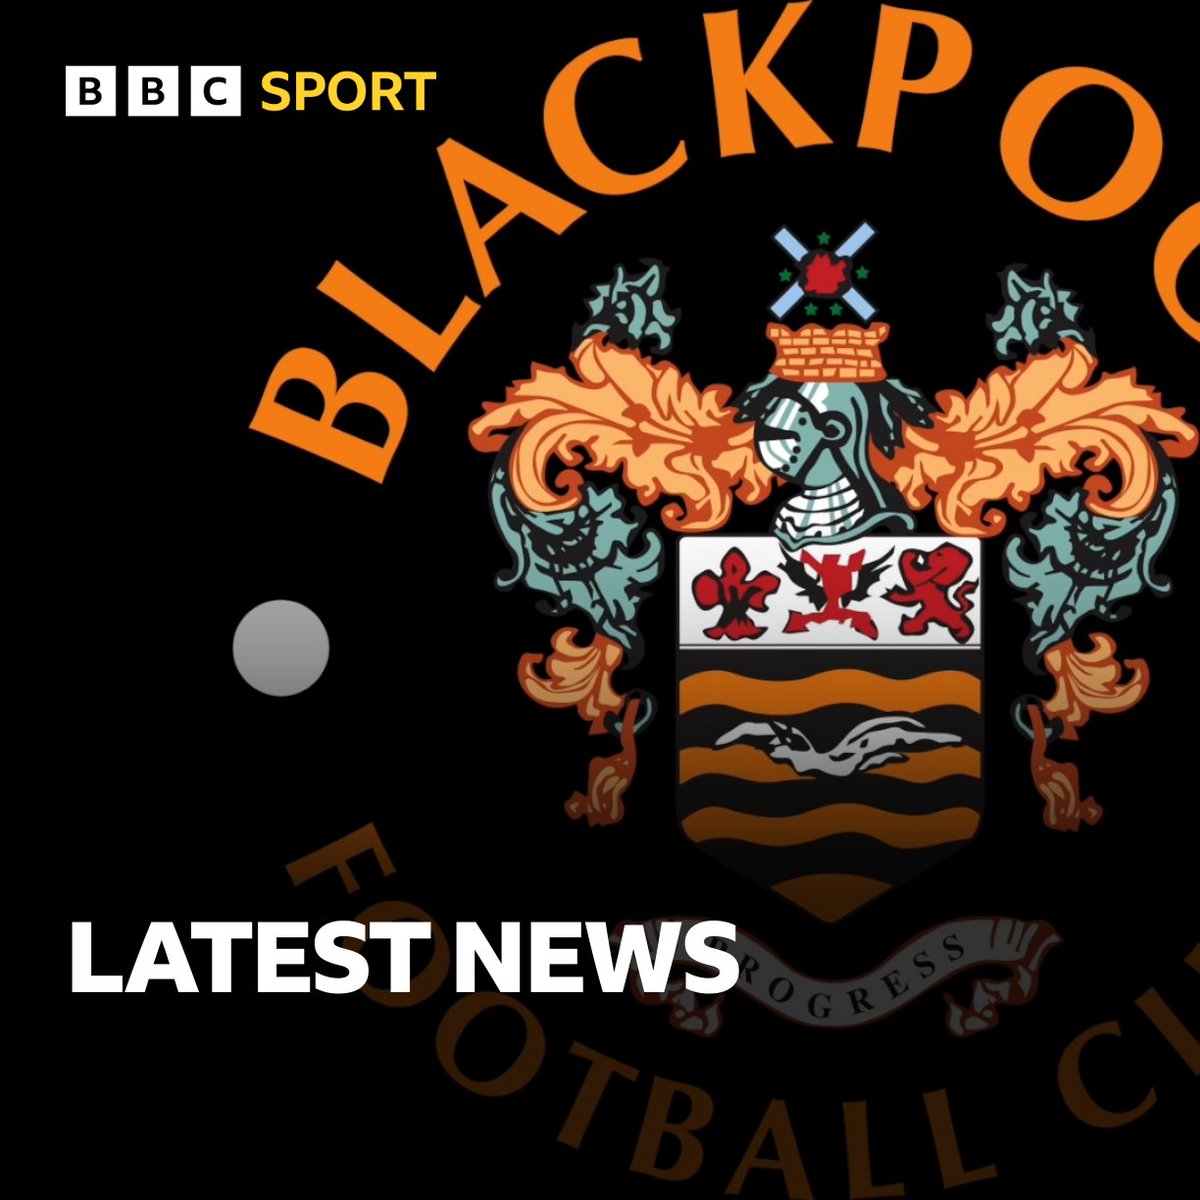 The owner of Blackpool Football Club, Simon Sadler, has appeared in court in Hong Kong in connection with allegations of insider dealing. Mr Sadler, together with former trader Daniel La Rocca, is facing criminal proceedings alongside Sadler's company Segantii Capital Management…